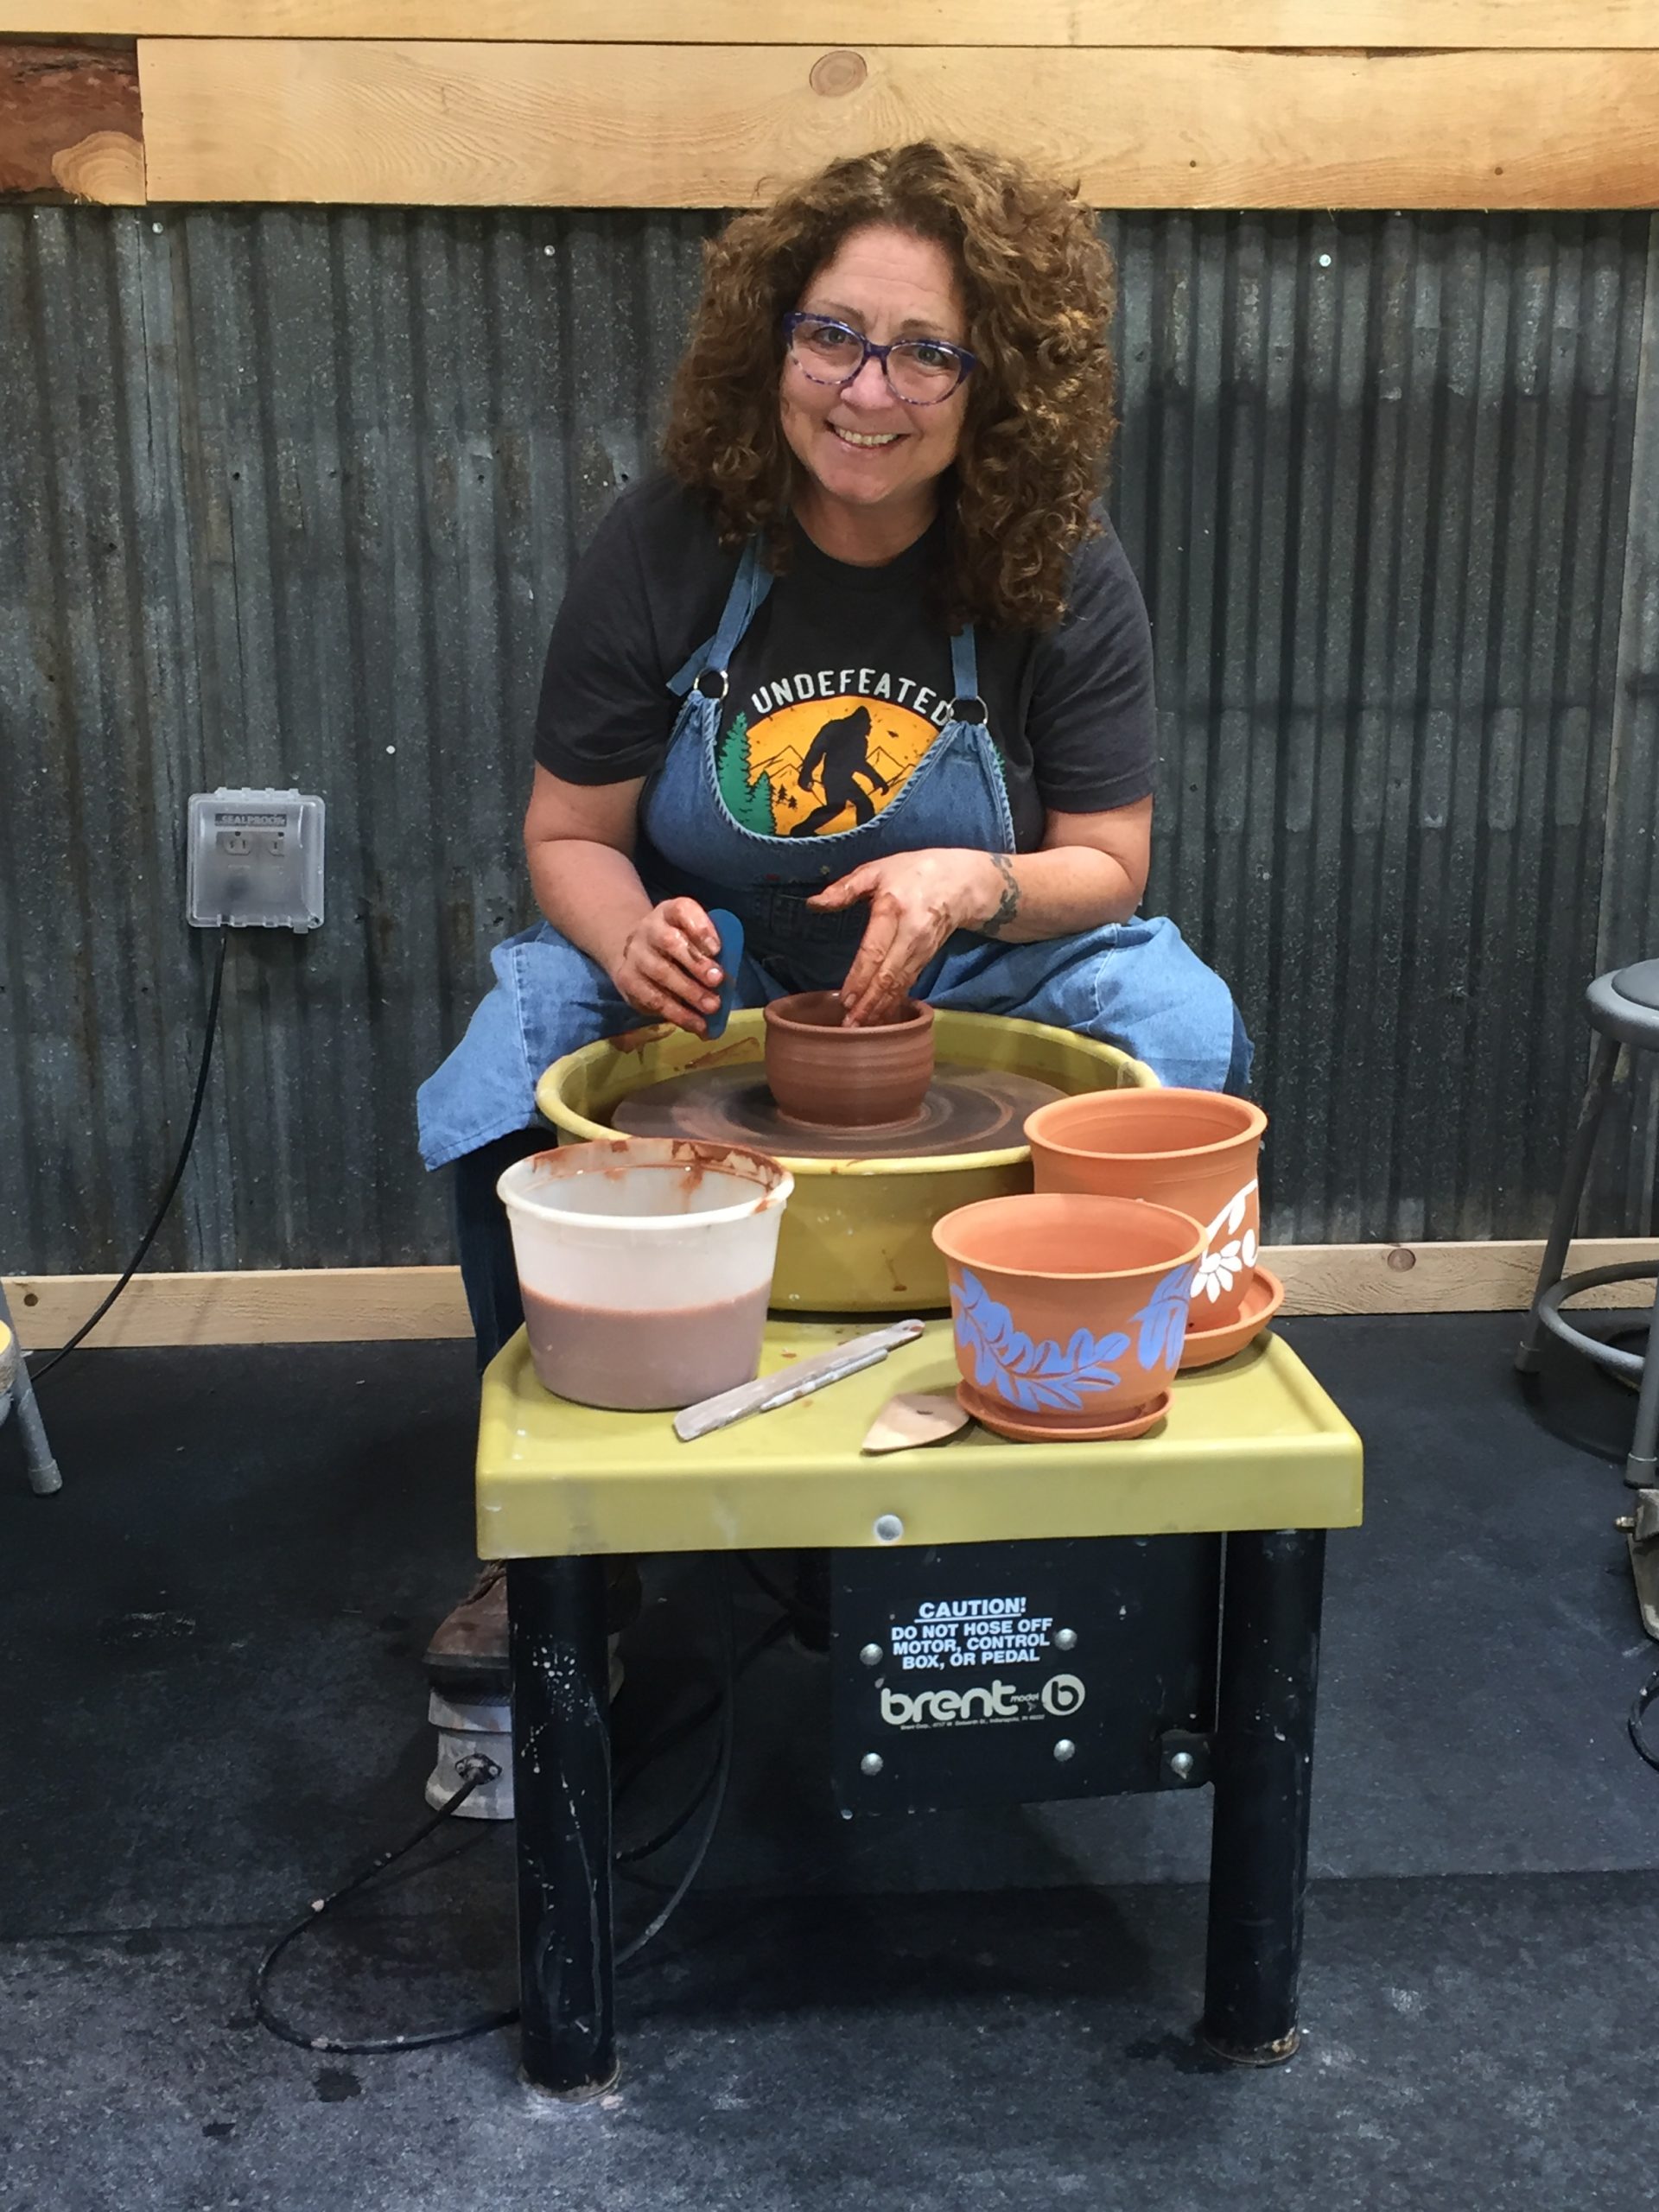 Cynthia creating at her potters wheel in her studio.